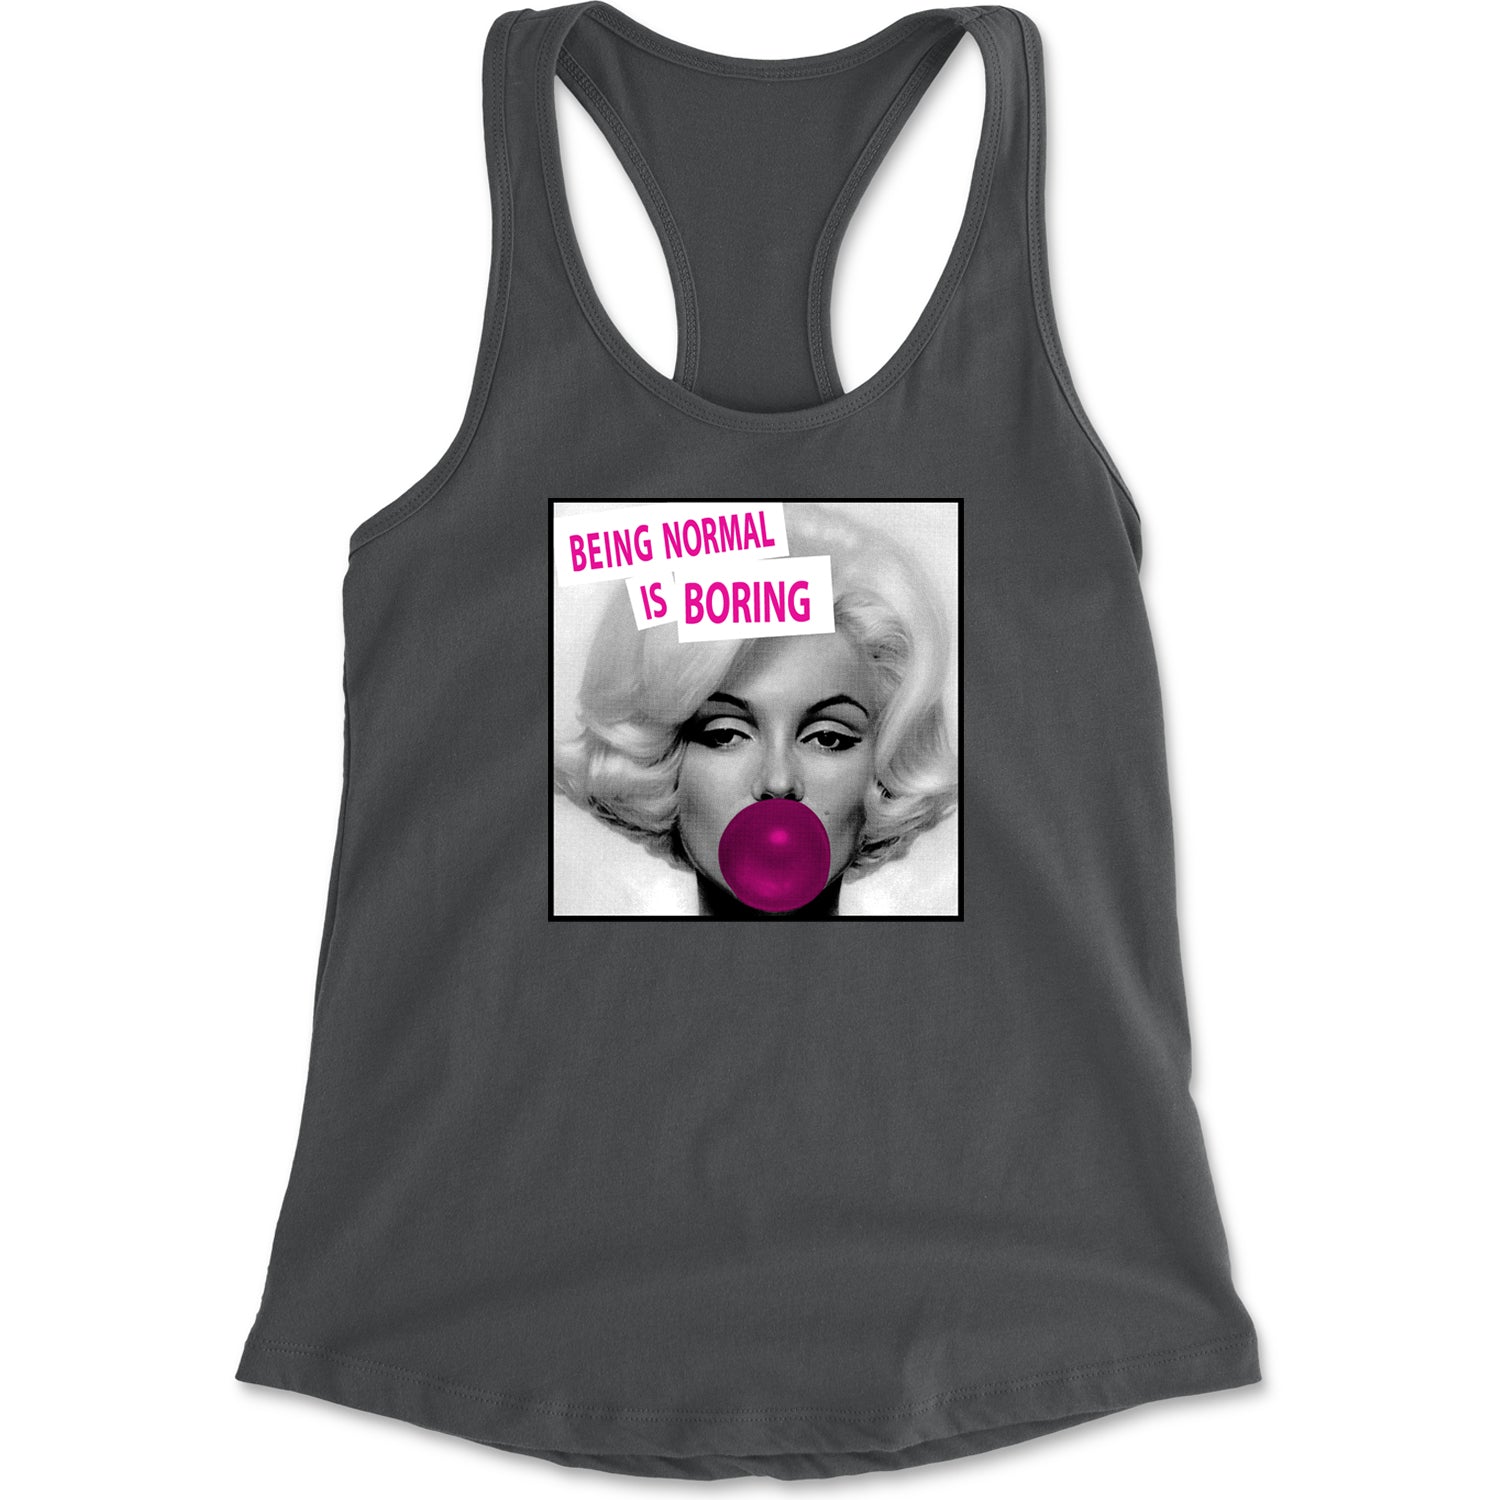 Marilyn Monroe Being Normal Is Boring Racerback Tank Top for Women art, iconic, marilyn, monroe, pop by Expression Tees